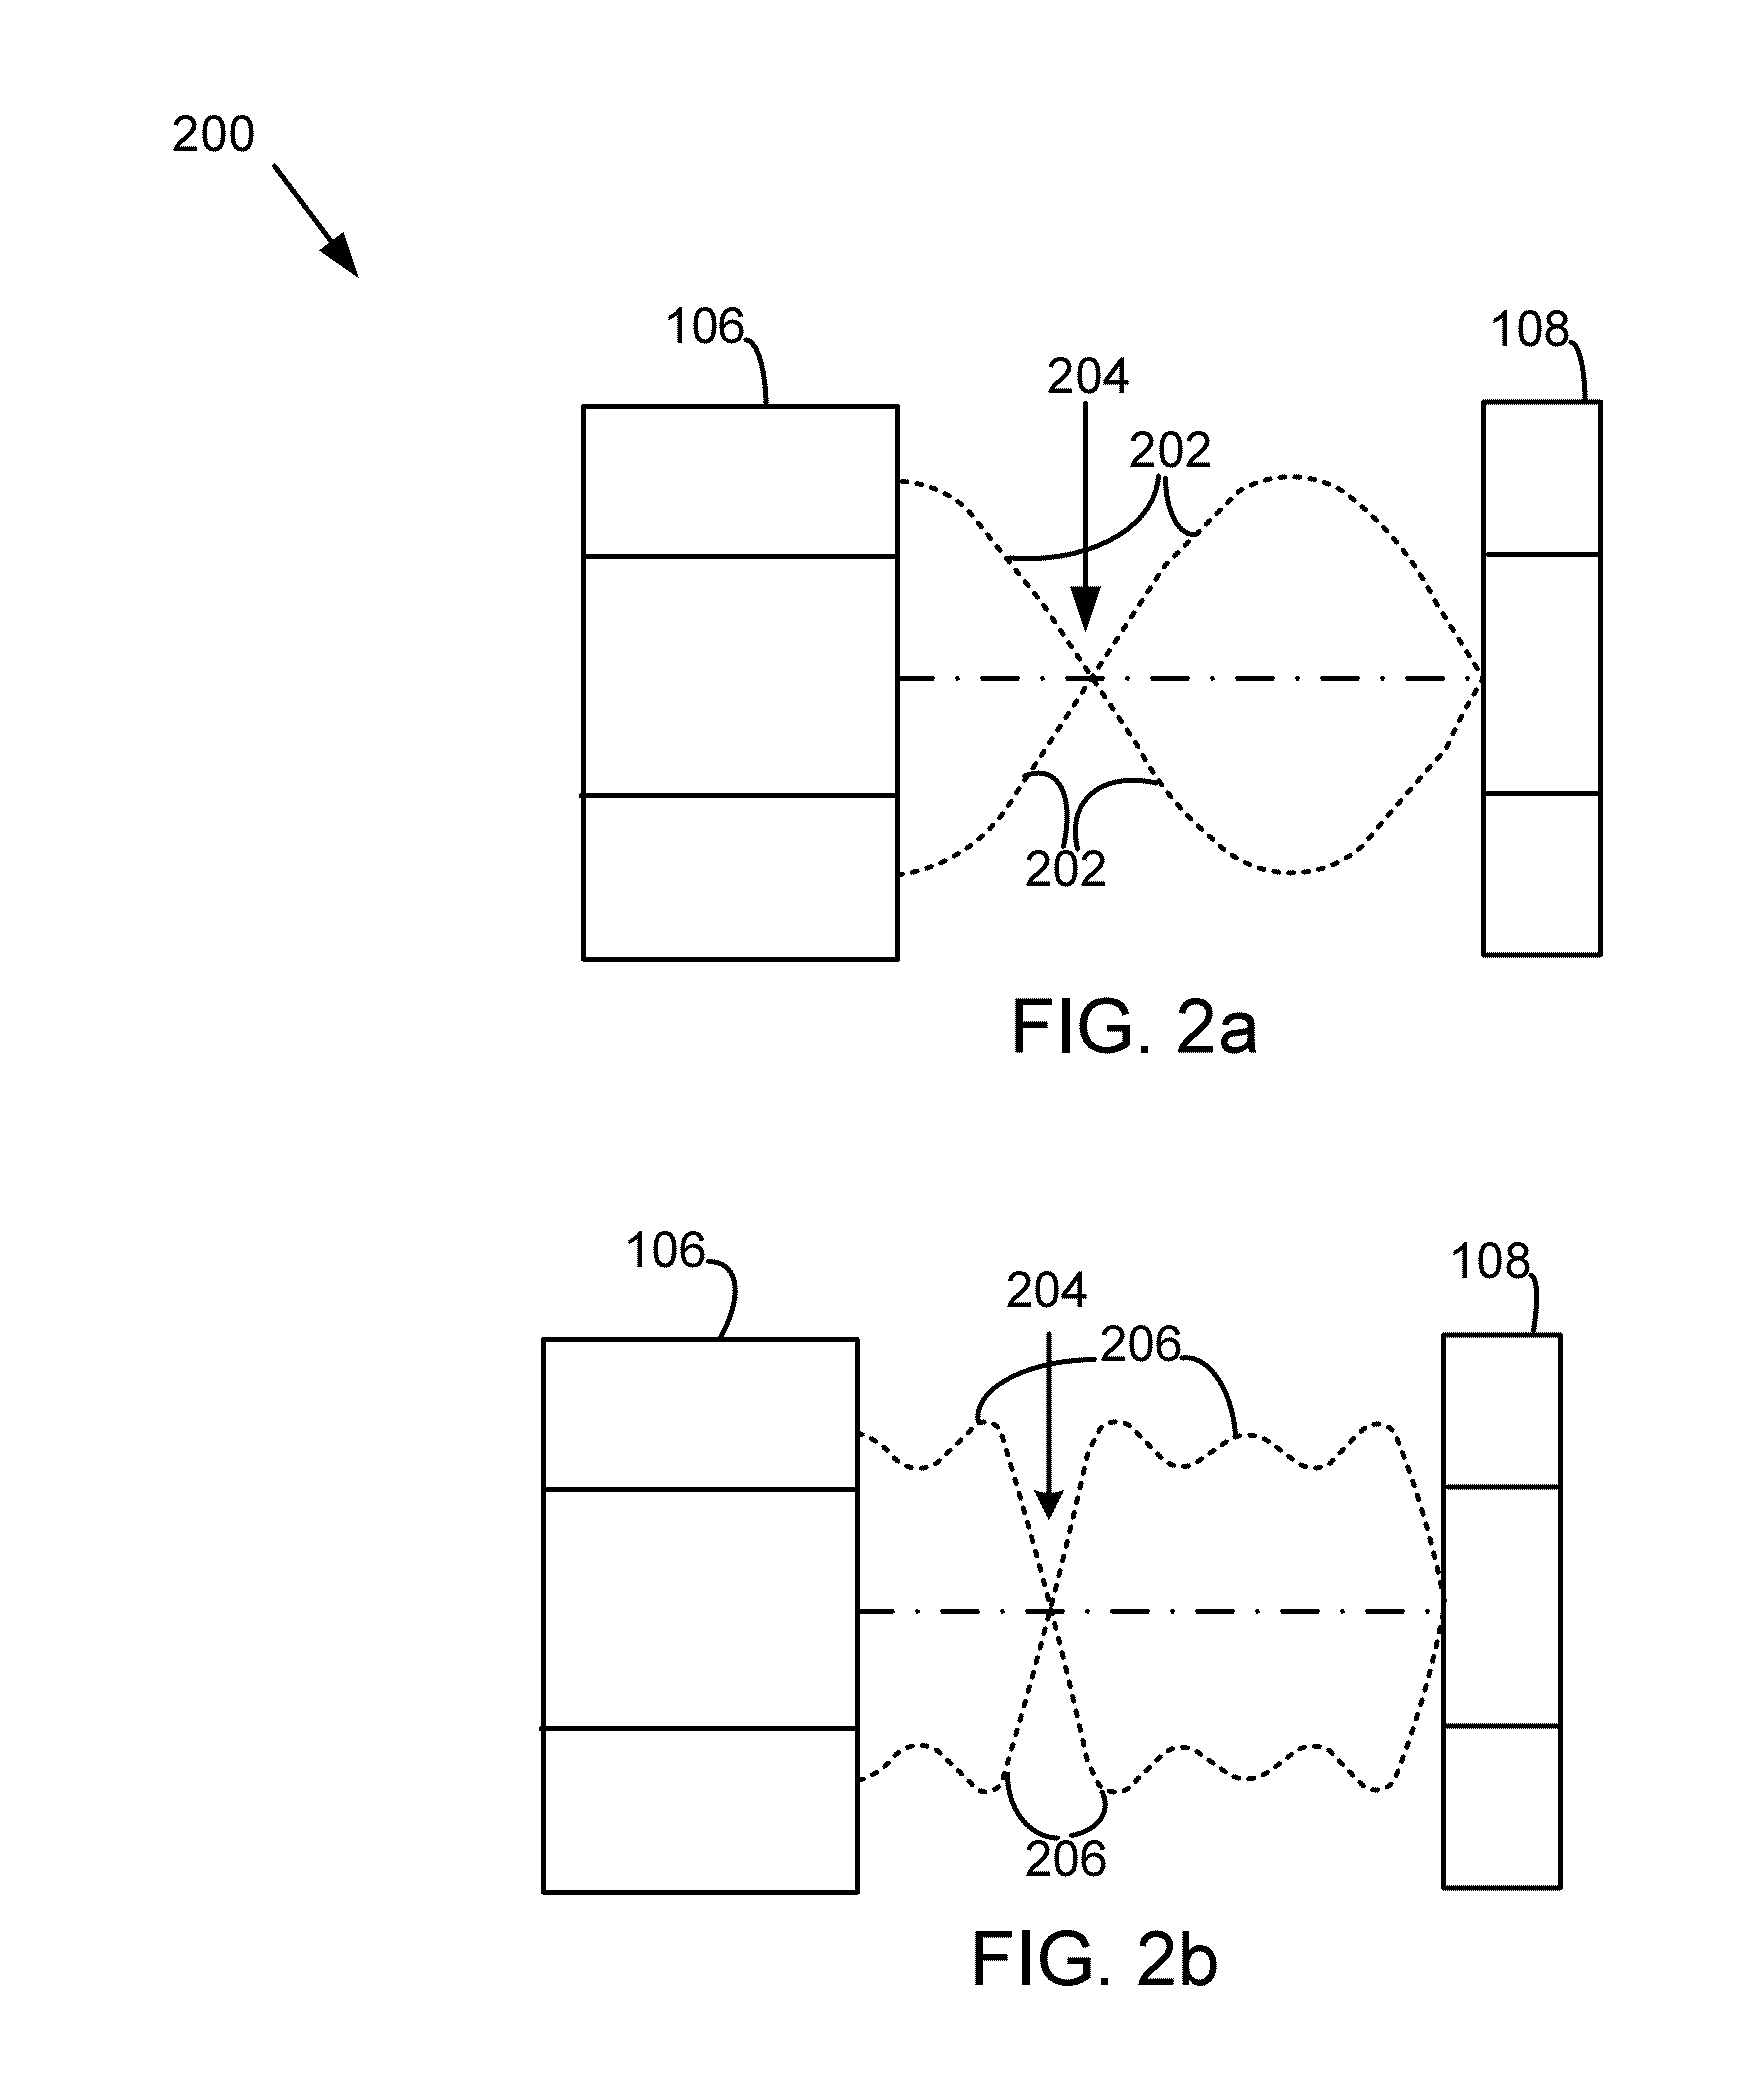 System and method for harmonic modulation of standing wavefields for spatial focusing, manipulation, and patterning